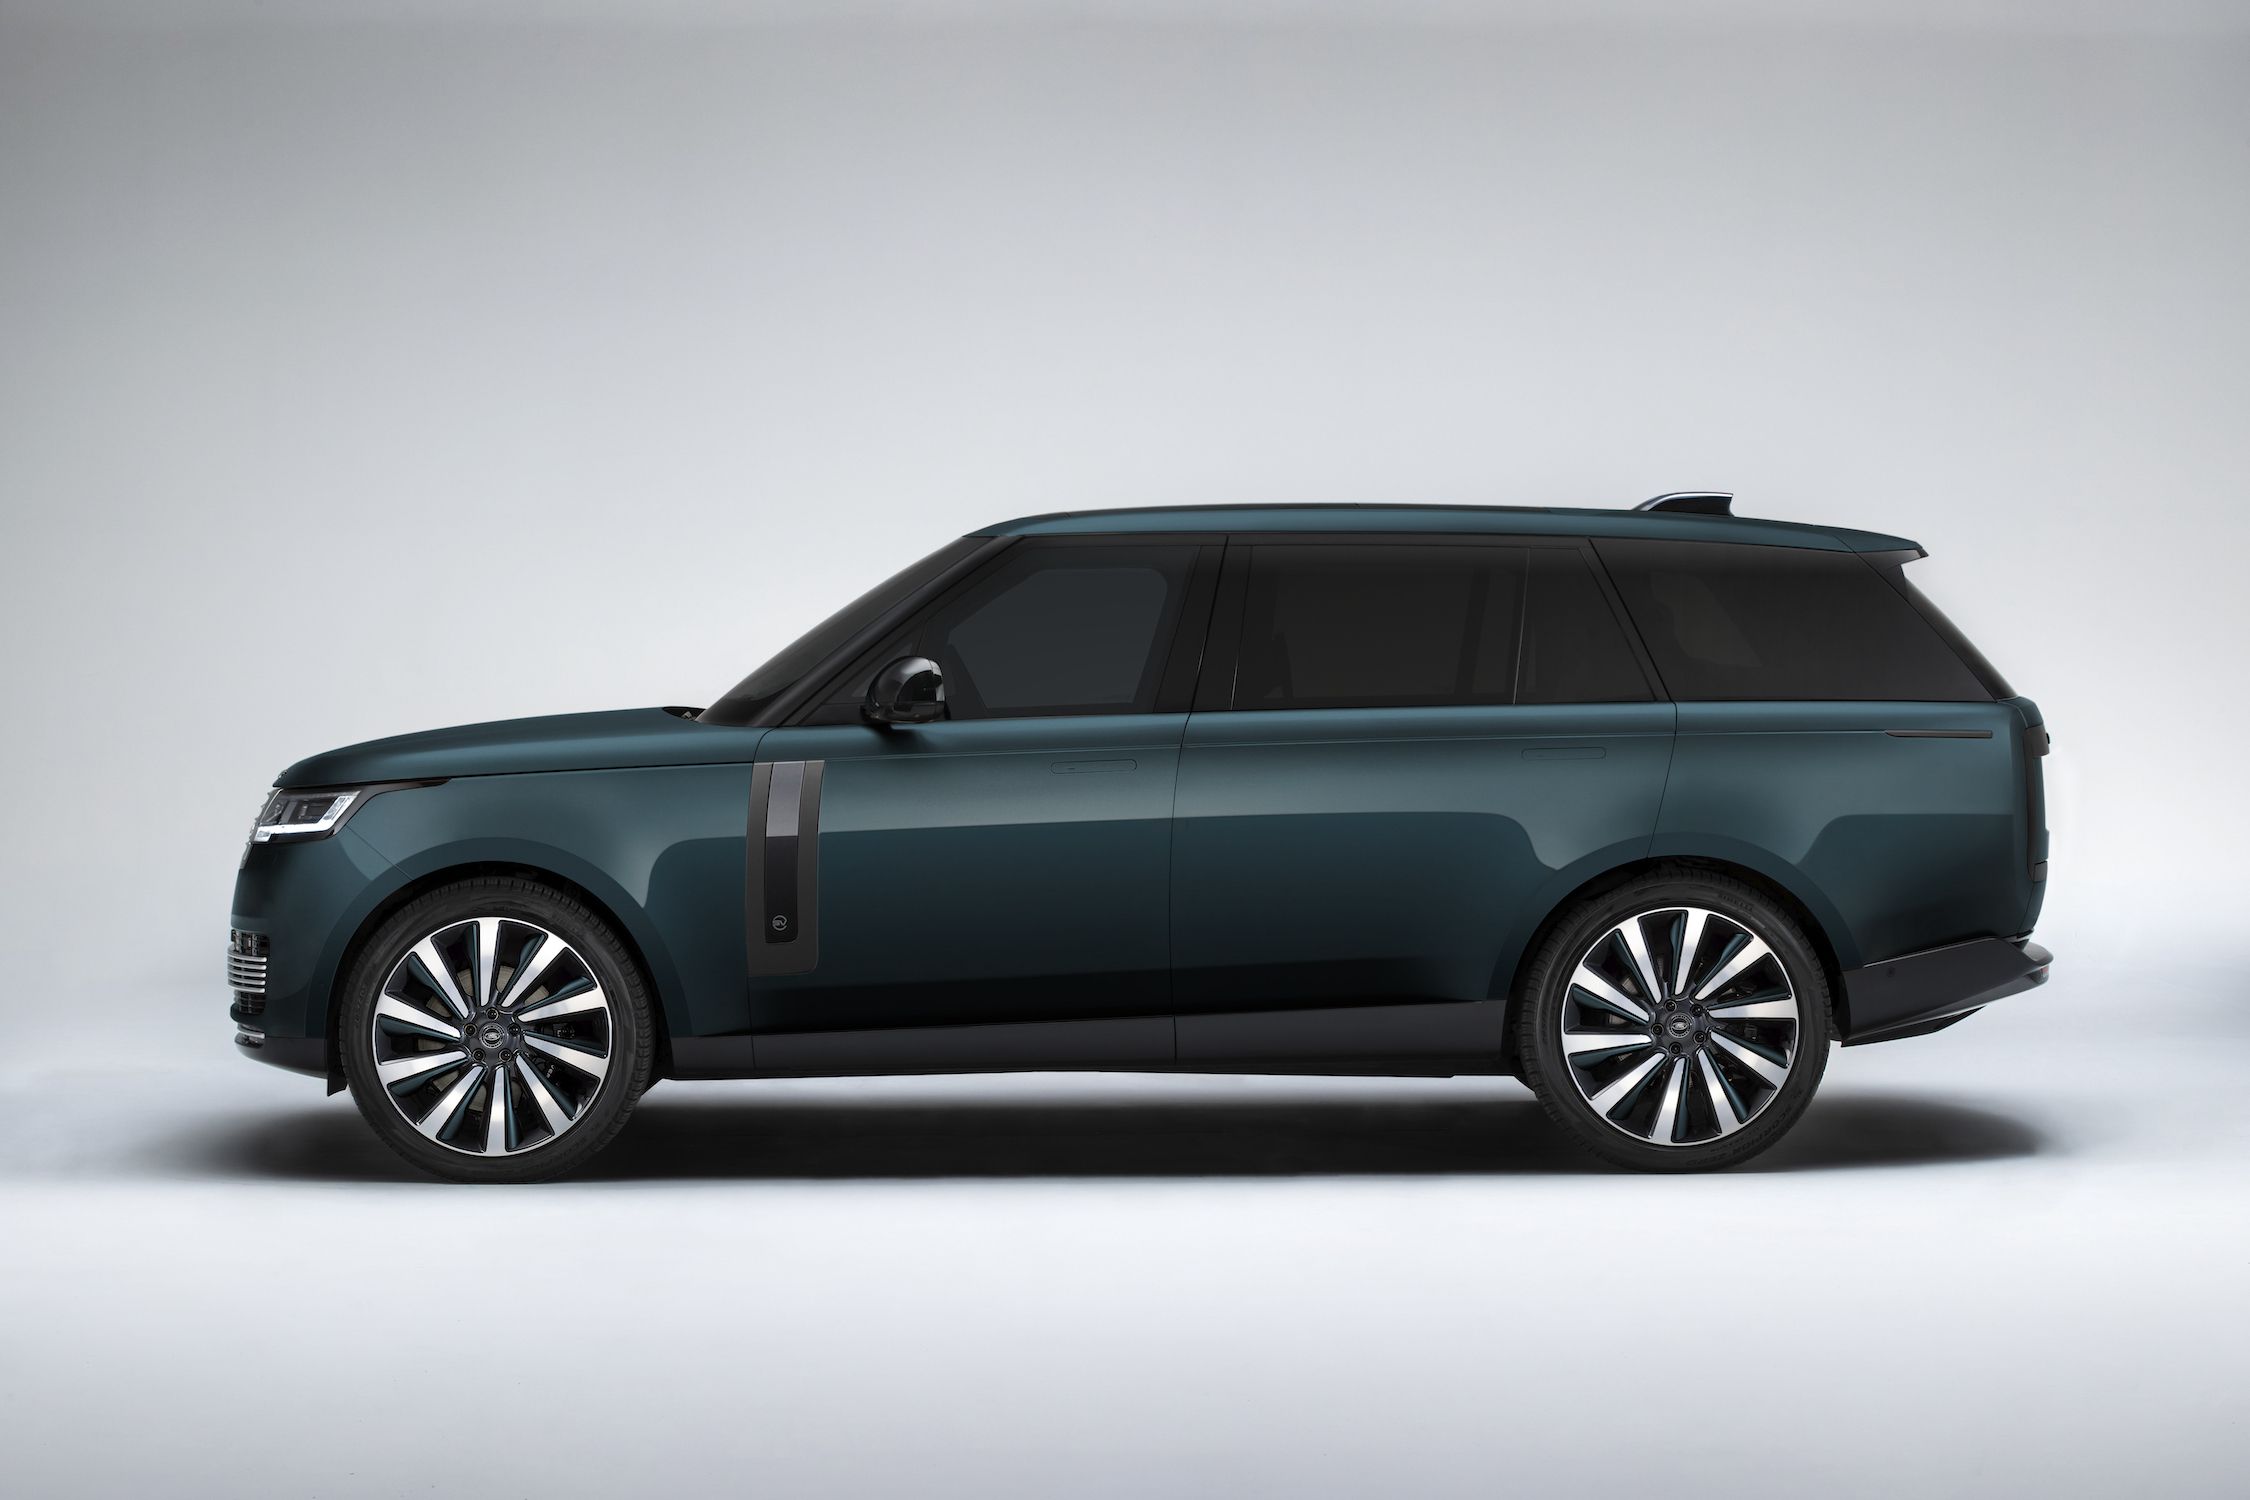 Land Rover Just Revealed a $370,000 Version of Its Full-Size SUV